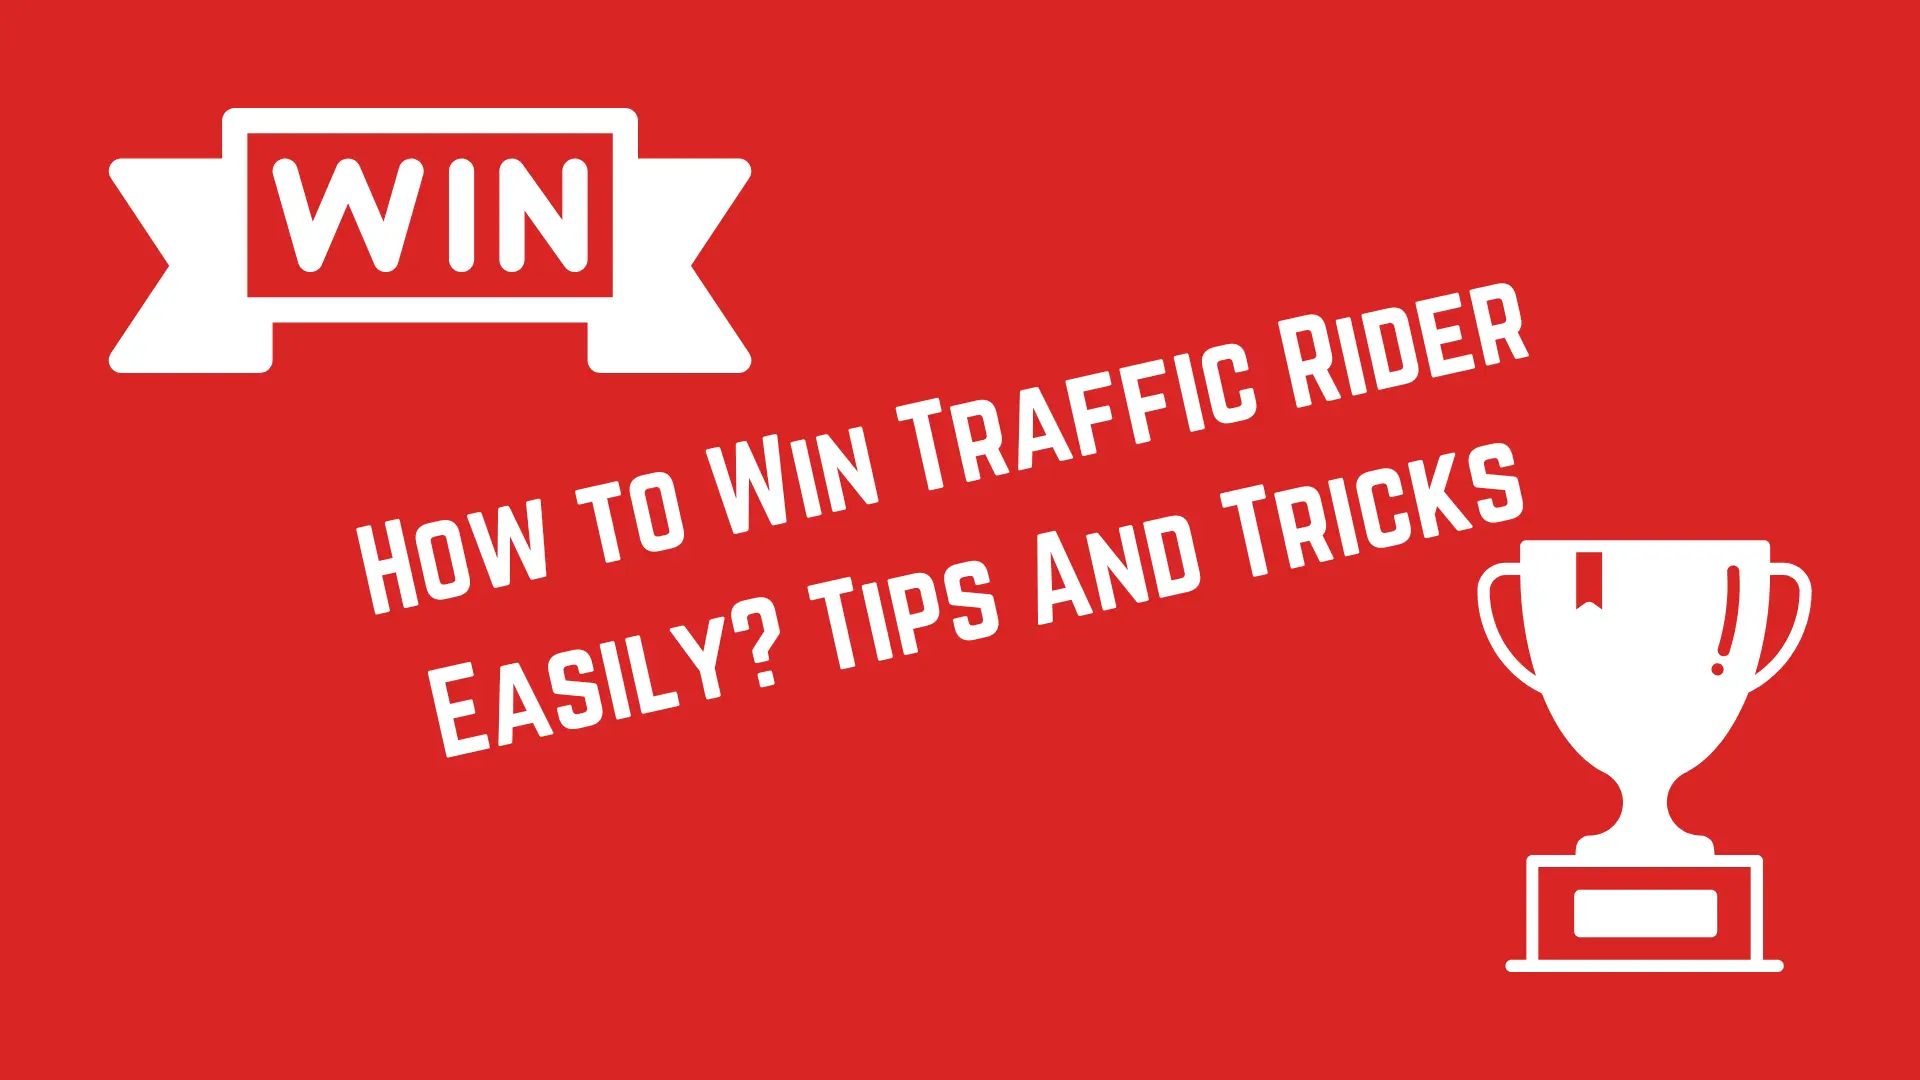 how to win traffic rider easily